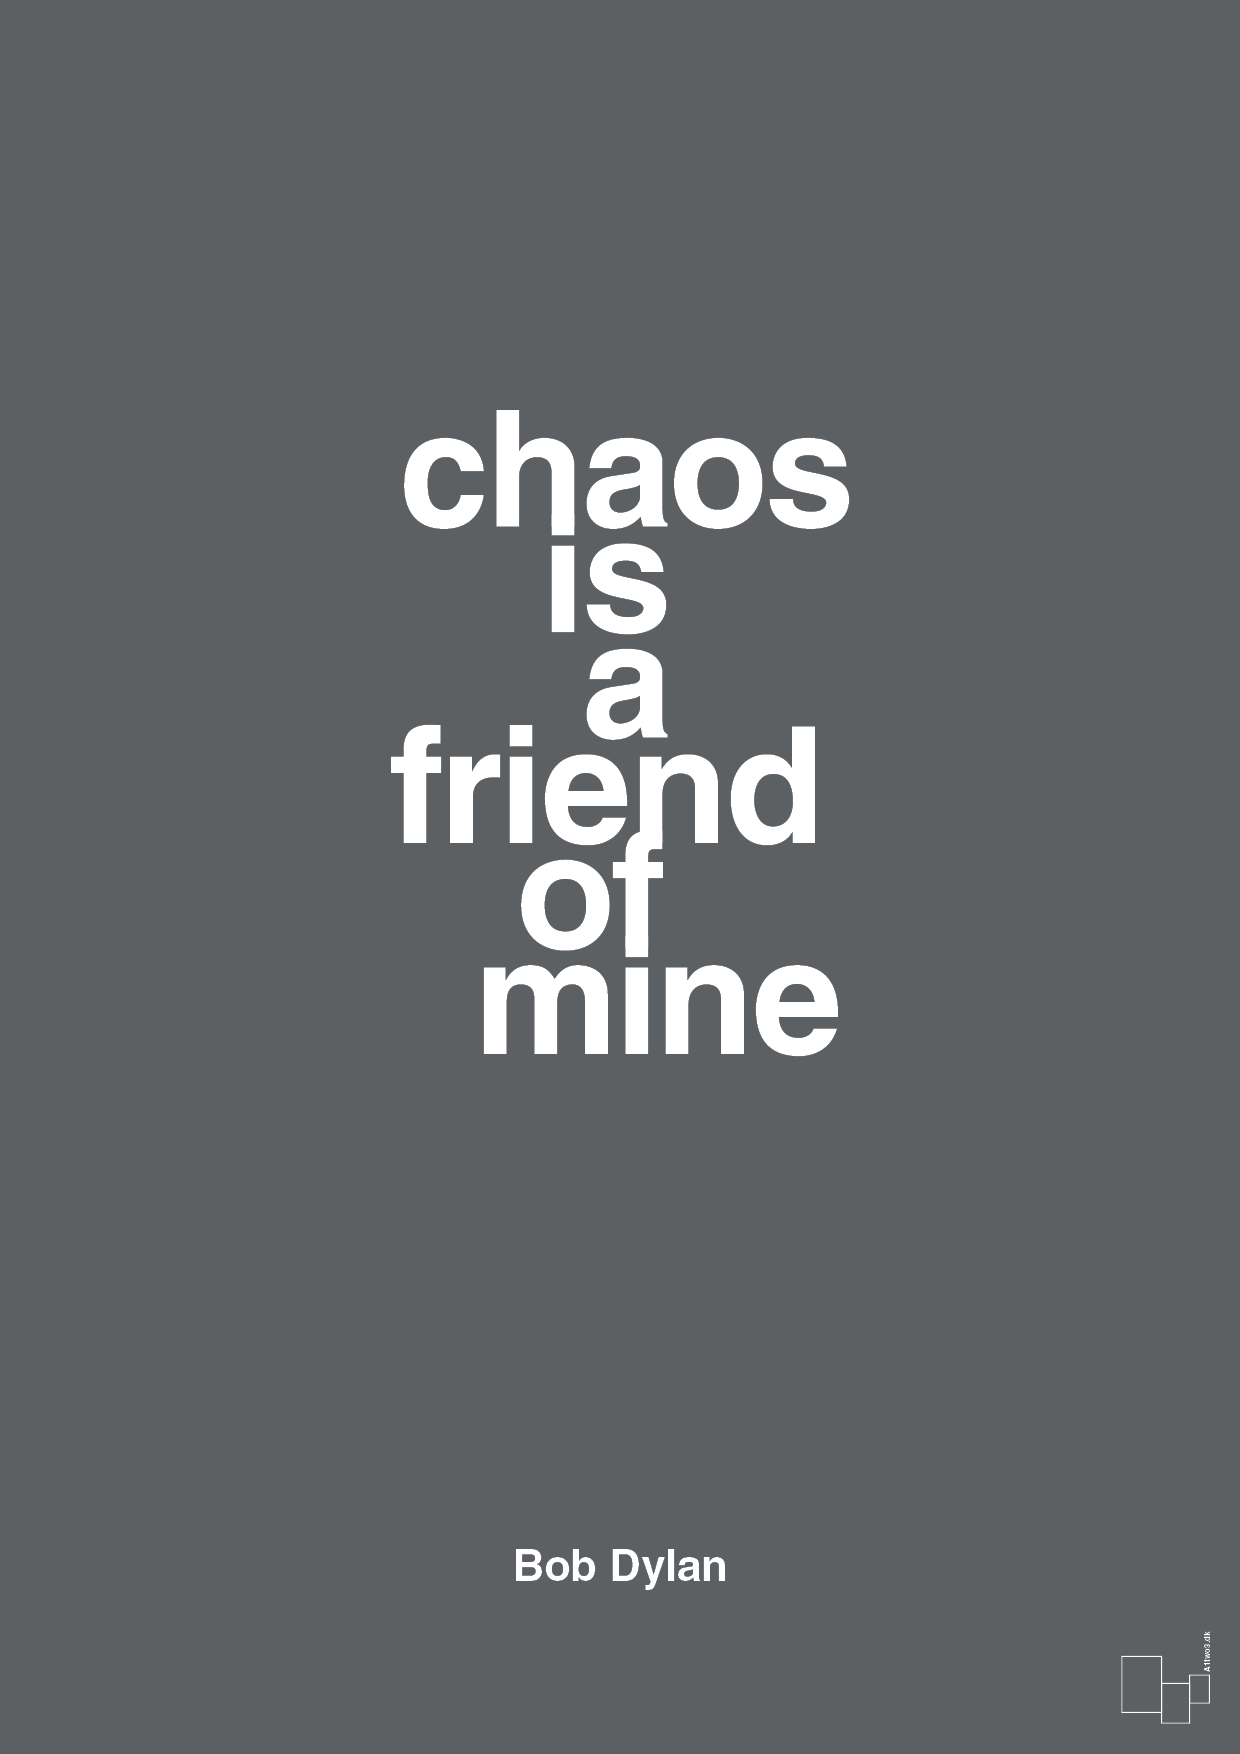 chaos is a friend of mine - Plakat med Citater i Graphic Charcoal